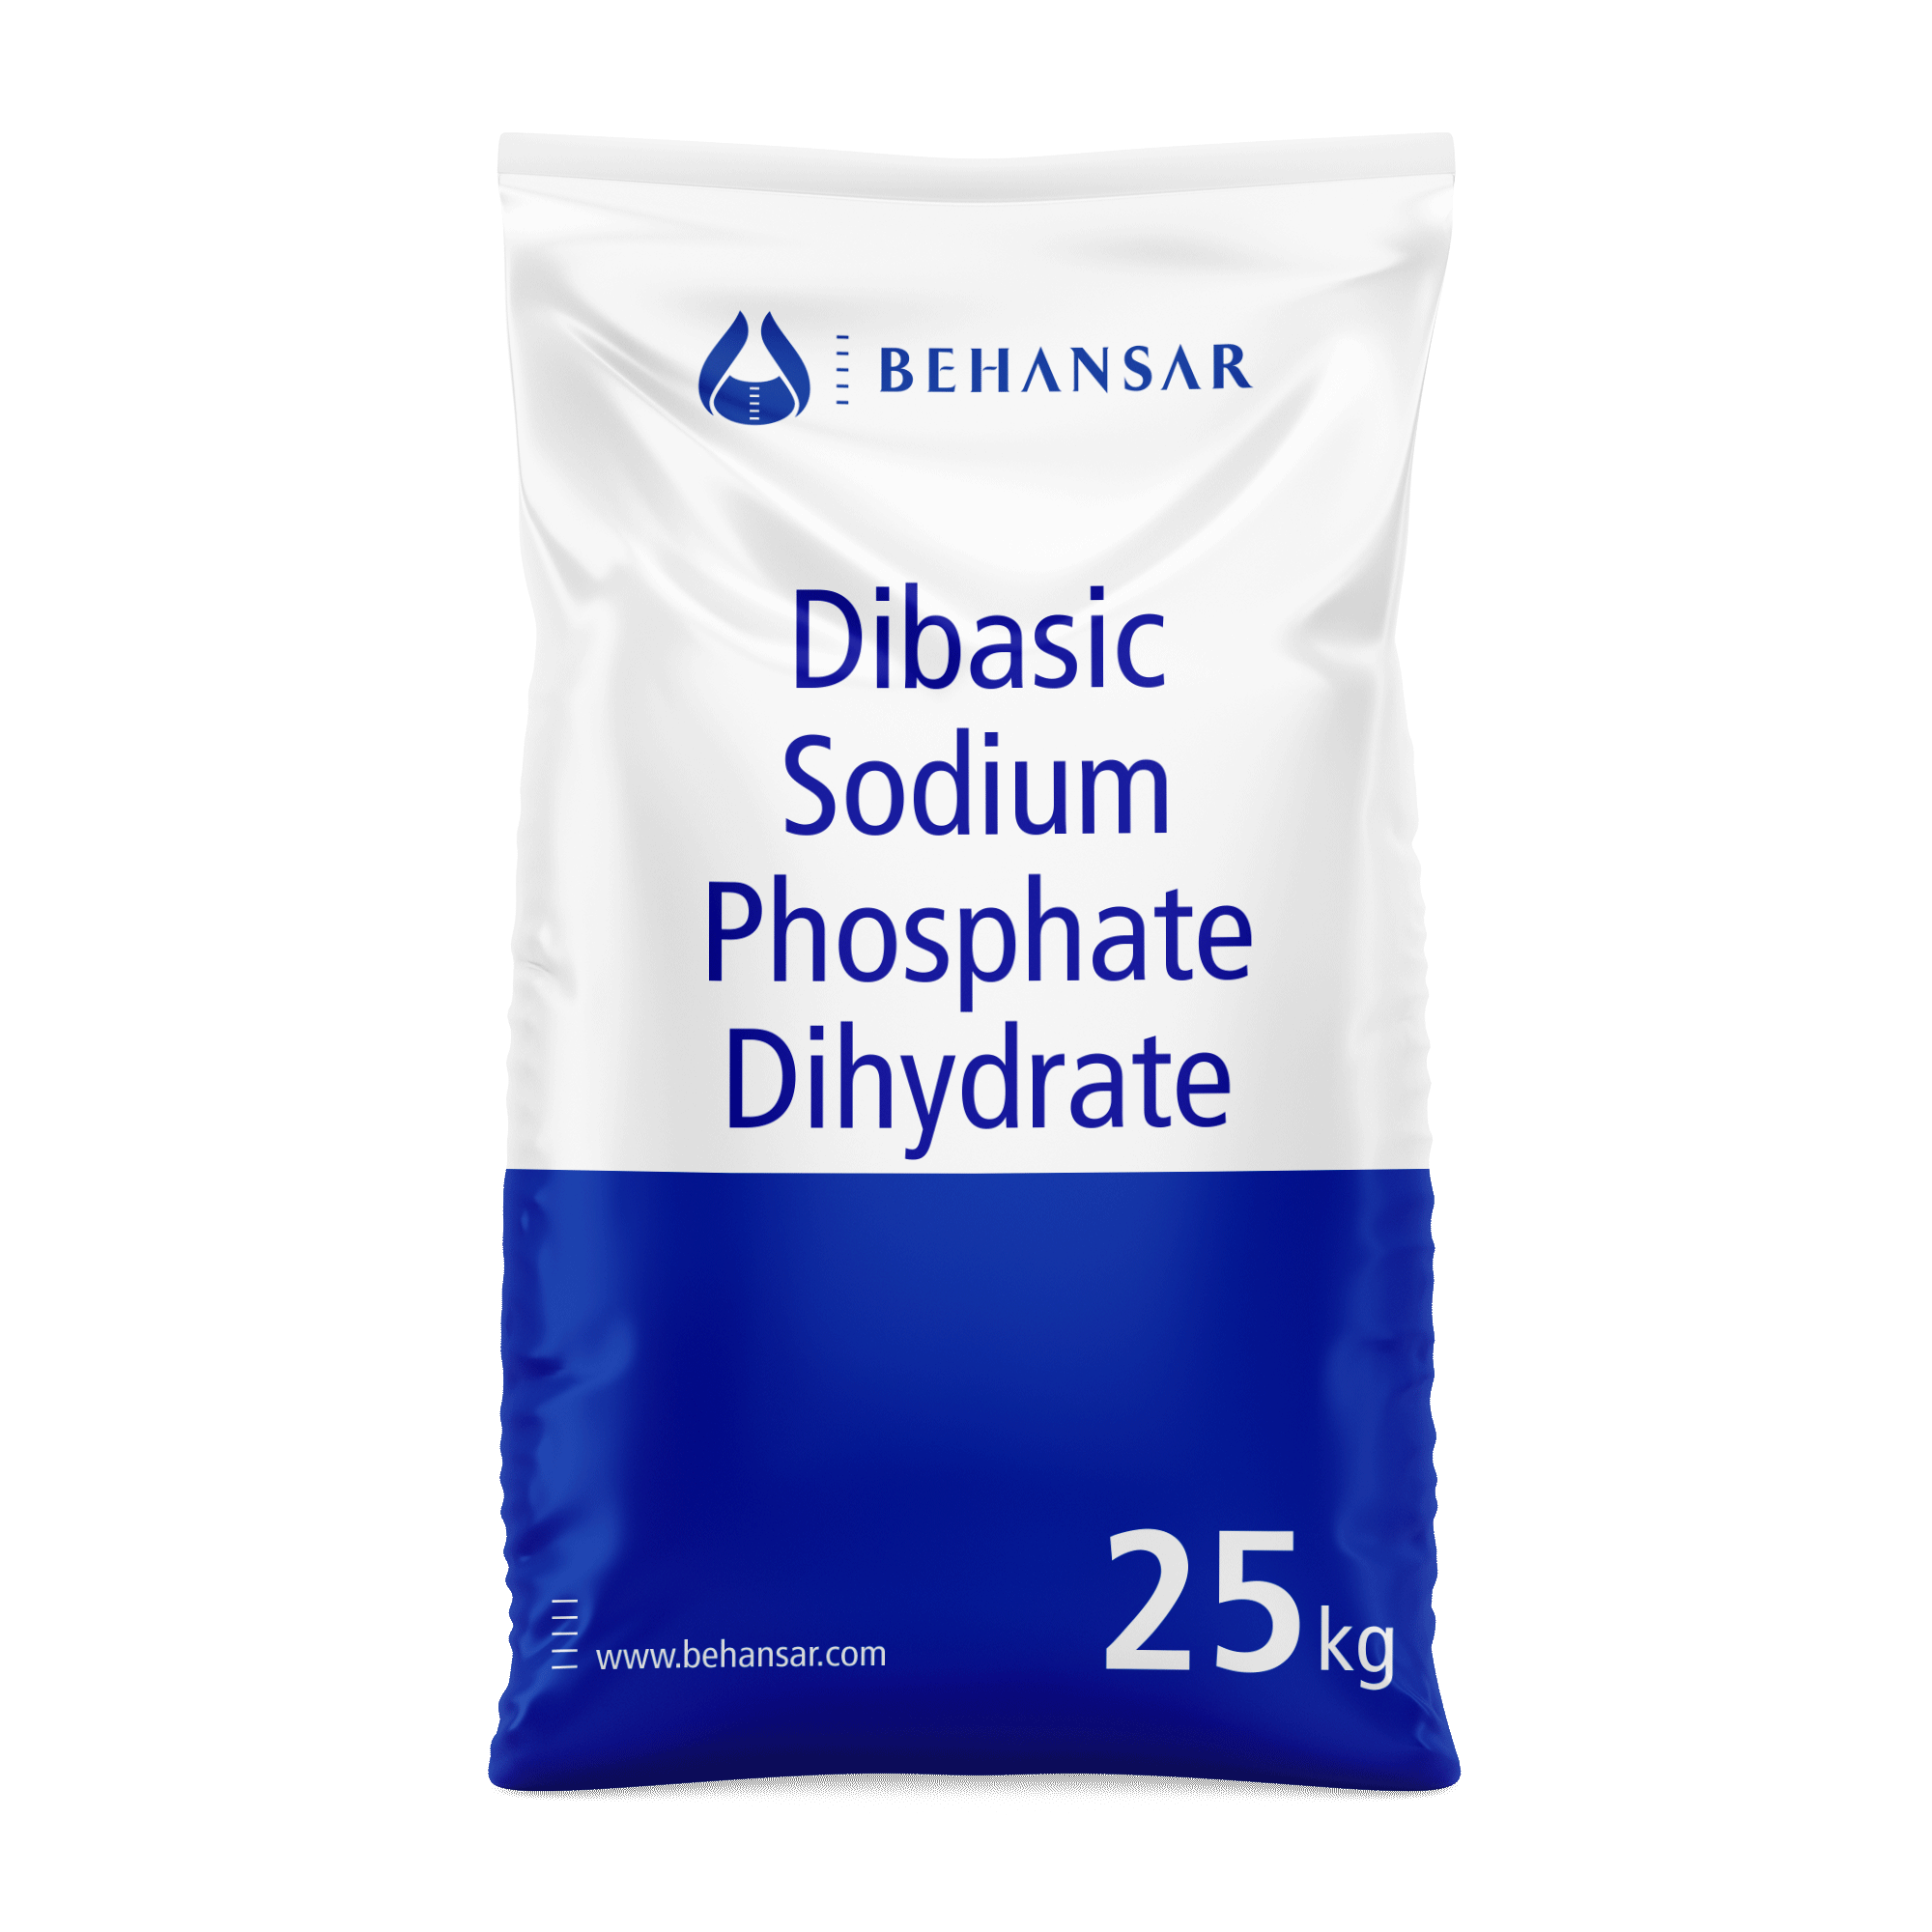 Dibasic Sodium Phosphate Dihydrate is one of the products of Behansar Co